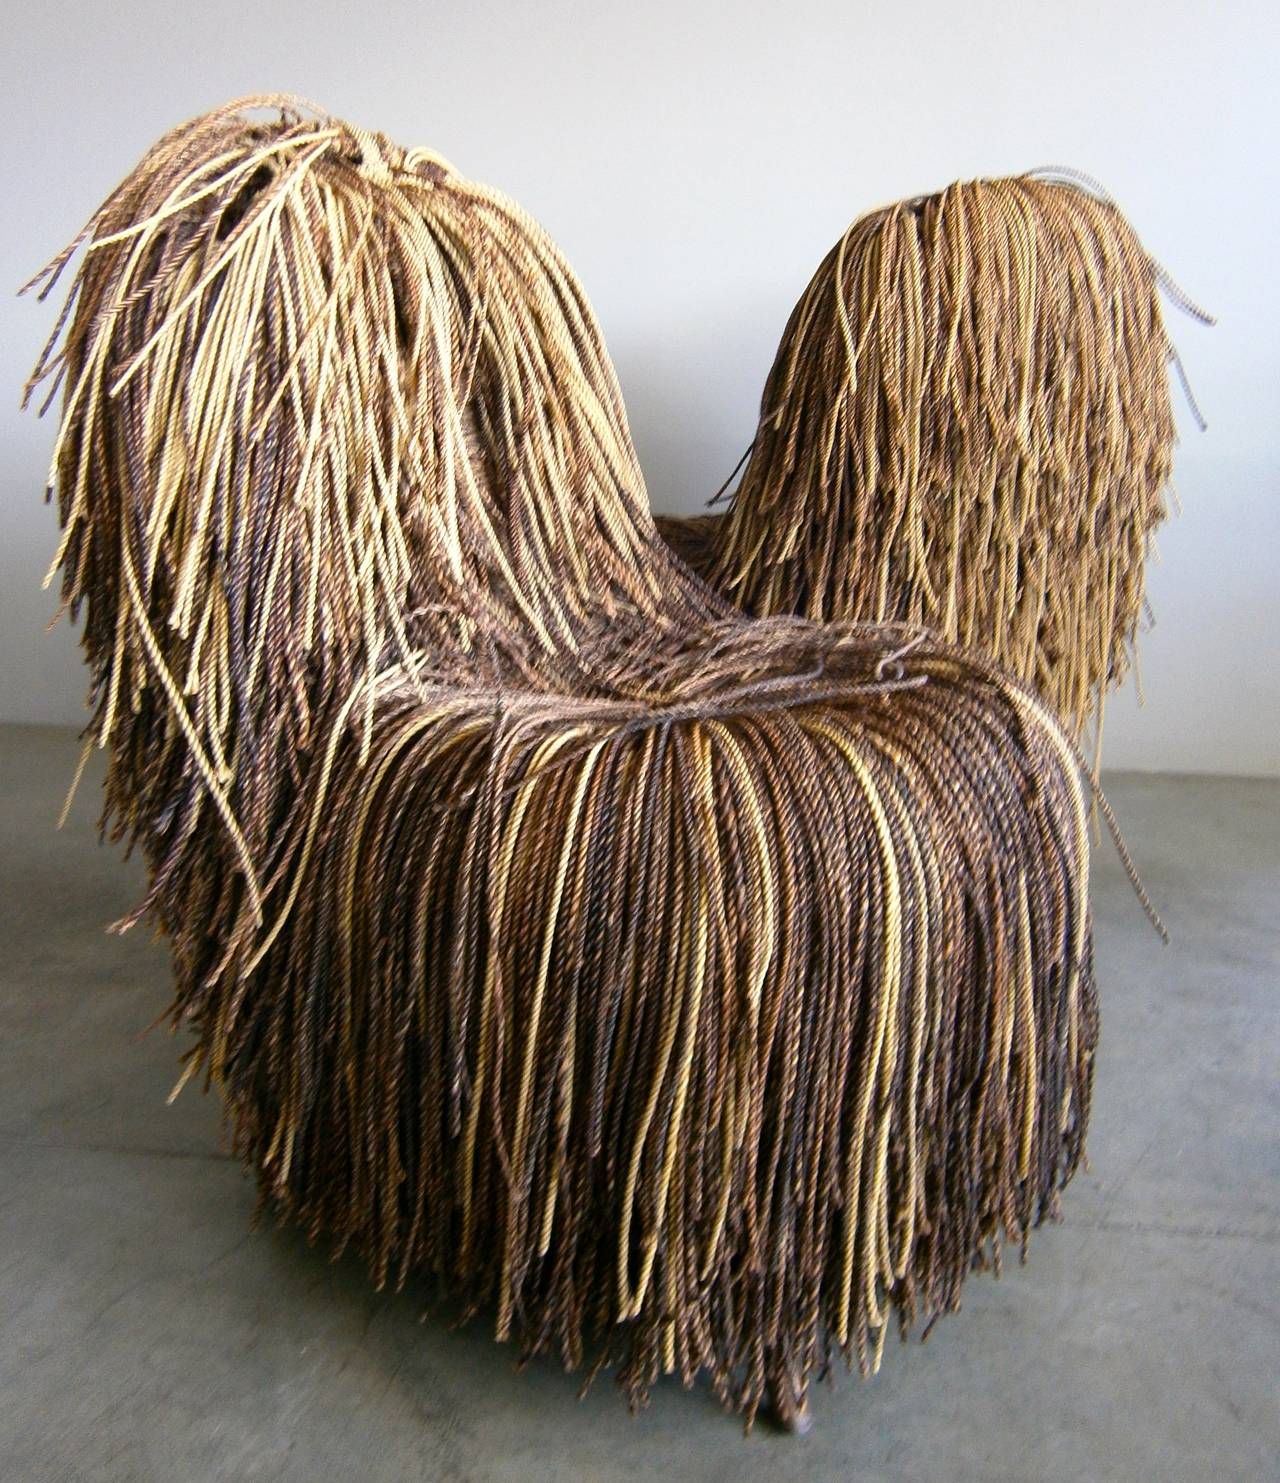 Jocular Pair of Shaggy Cord Chairs in the Style of the Campana Brothers. 1